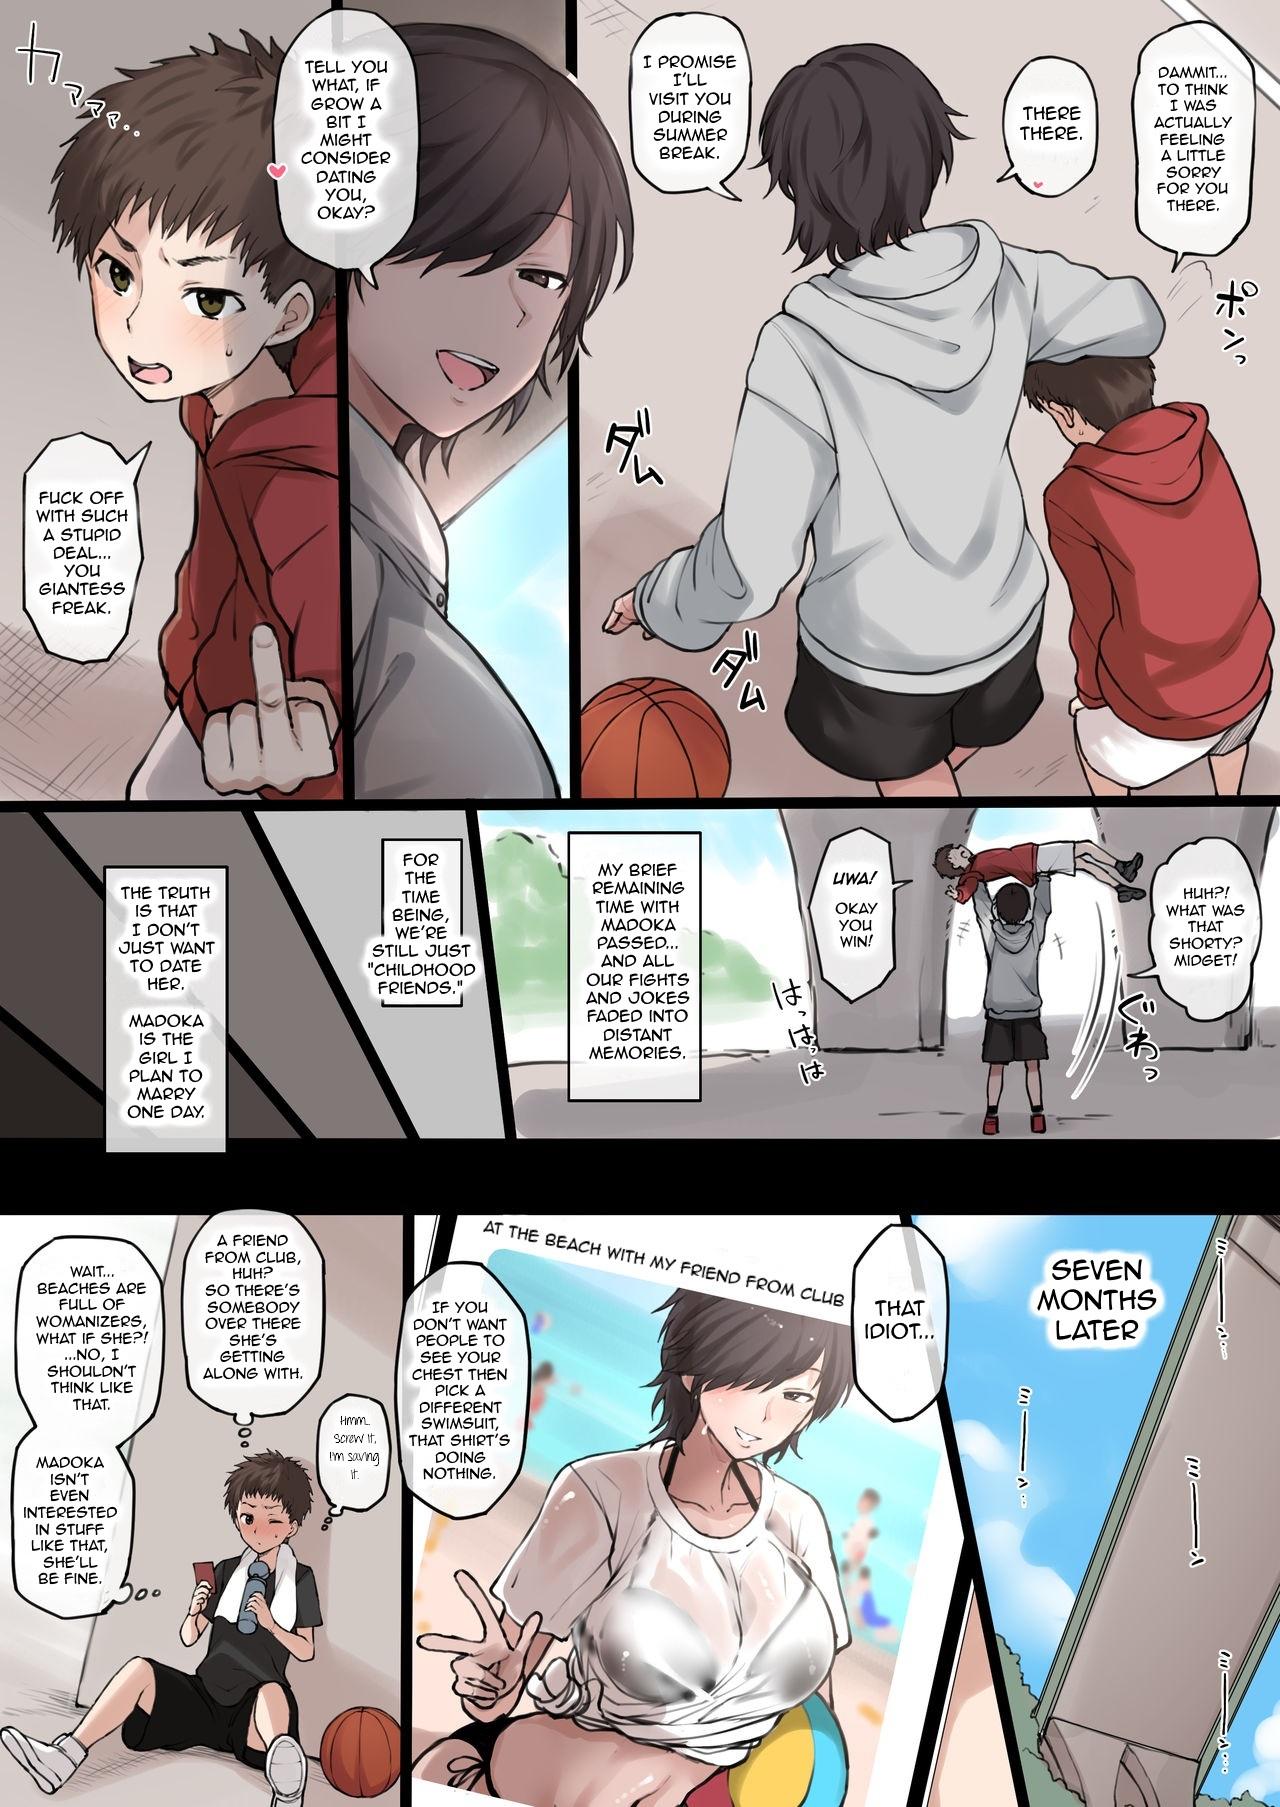 Bokep An NTR Perspective of a Picture Uploaded to Twitter of a Tall and Sporty Tomboy Caught - Page 4